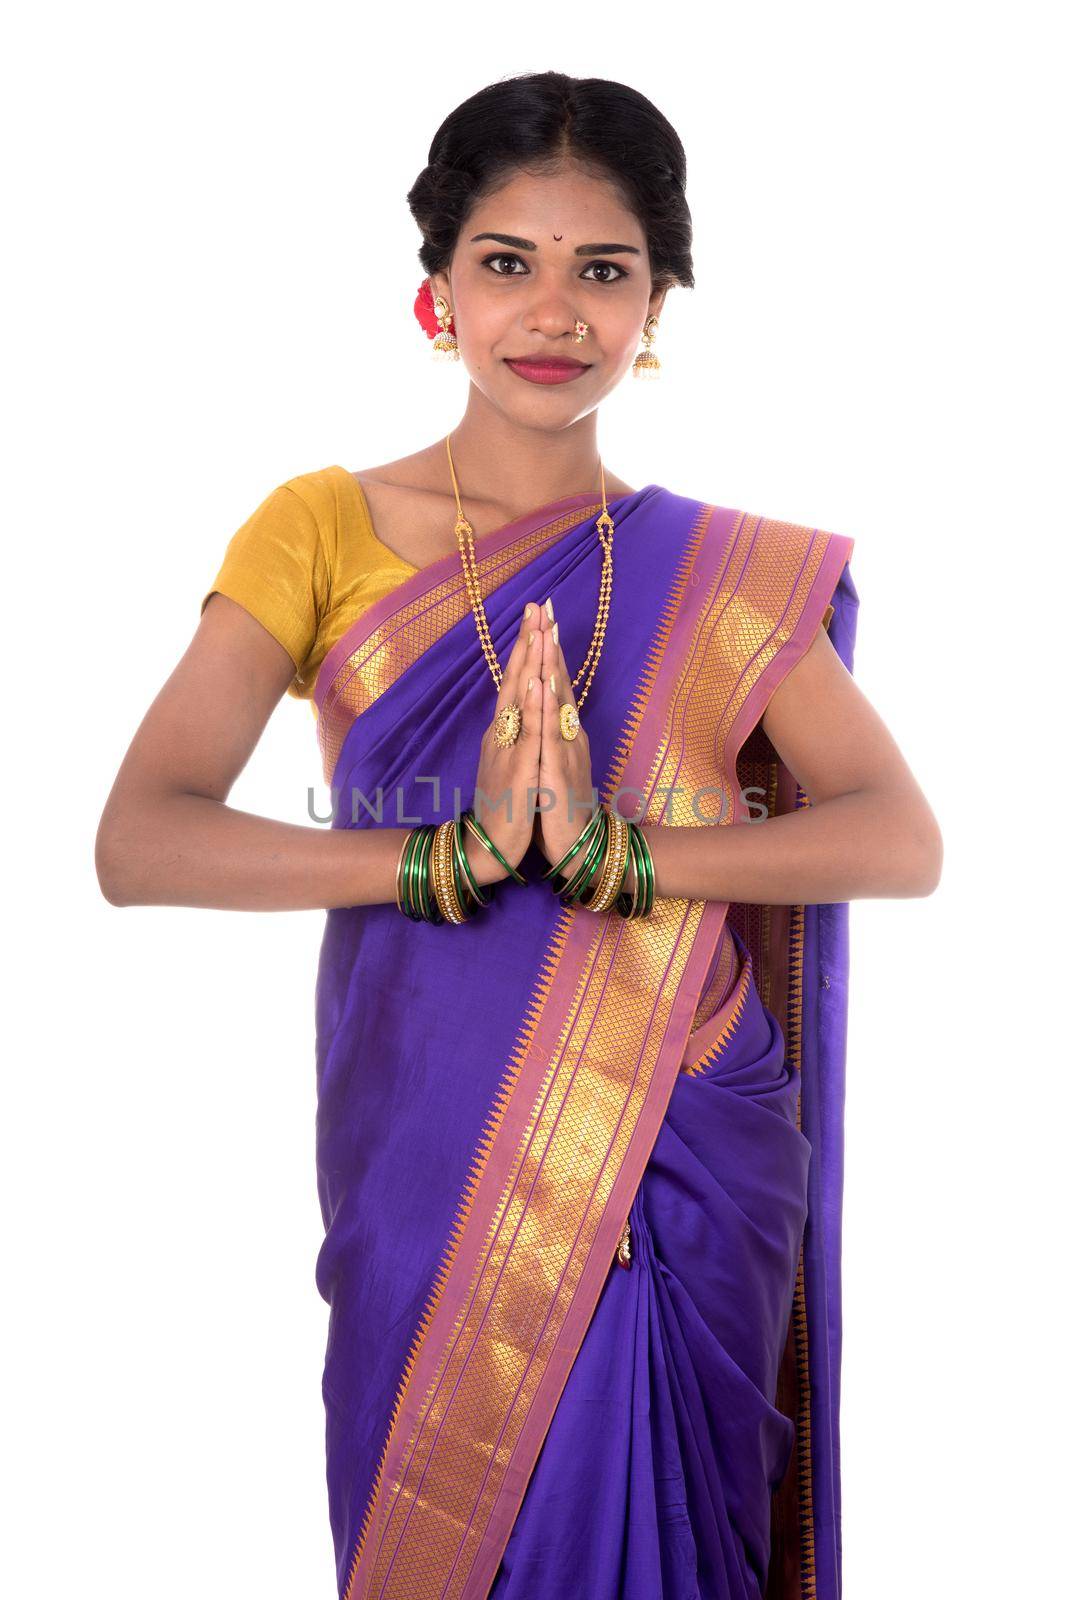 Young Indian girl in traditional clothing greeting namaste, Welcome, Indian girl in a tradition sari with welcome expression (inviting) by DipakShelare